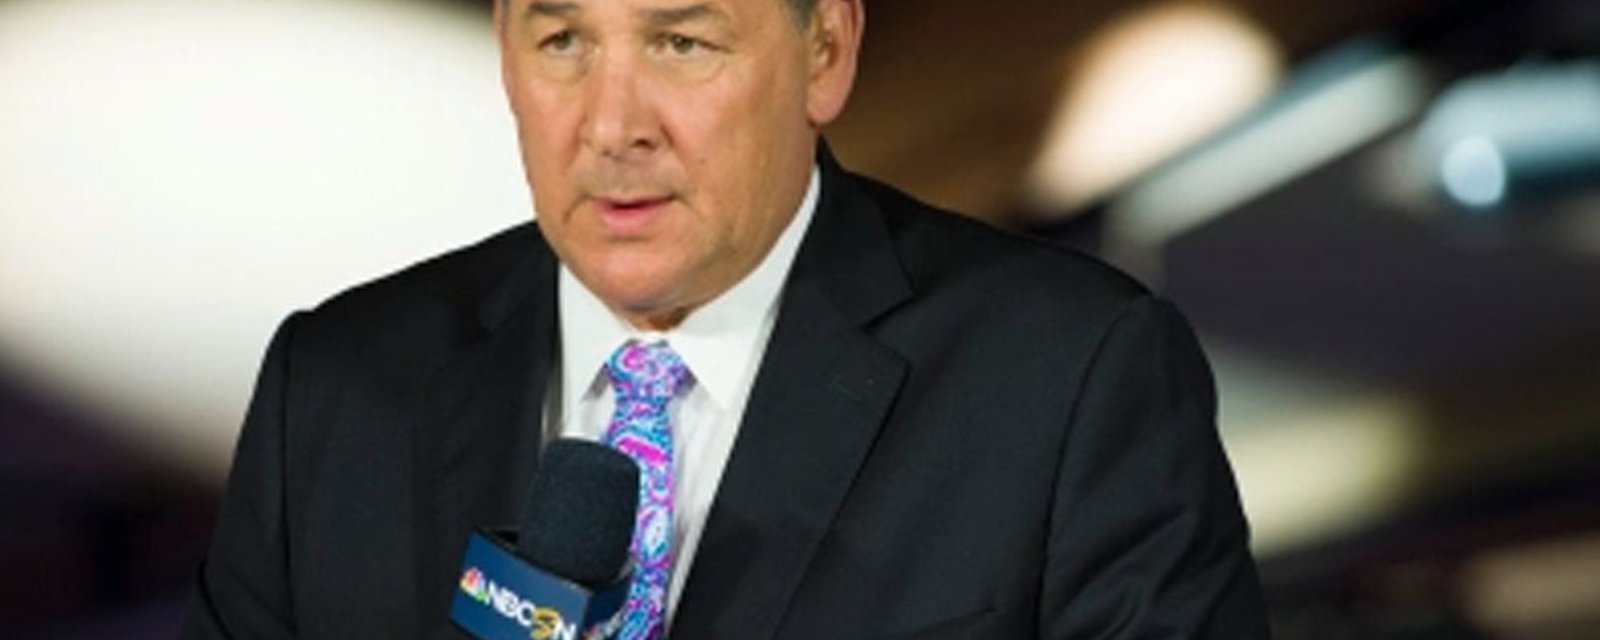 NHL makes strong statement on Mike Milbury’s comments! 